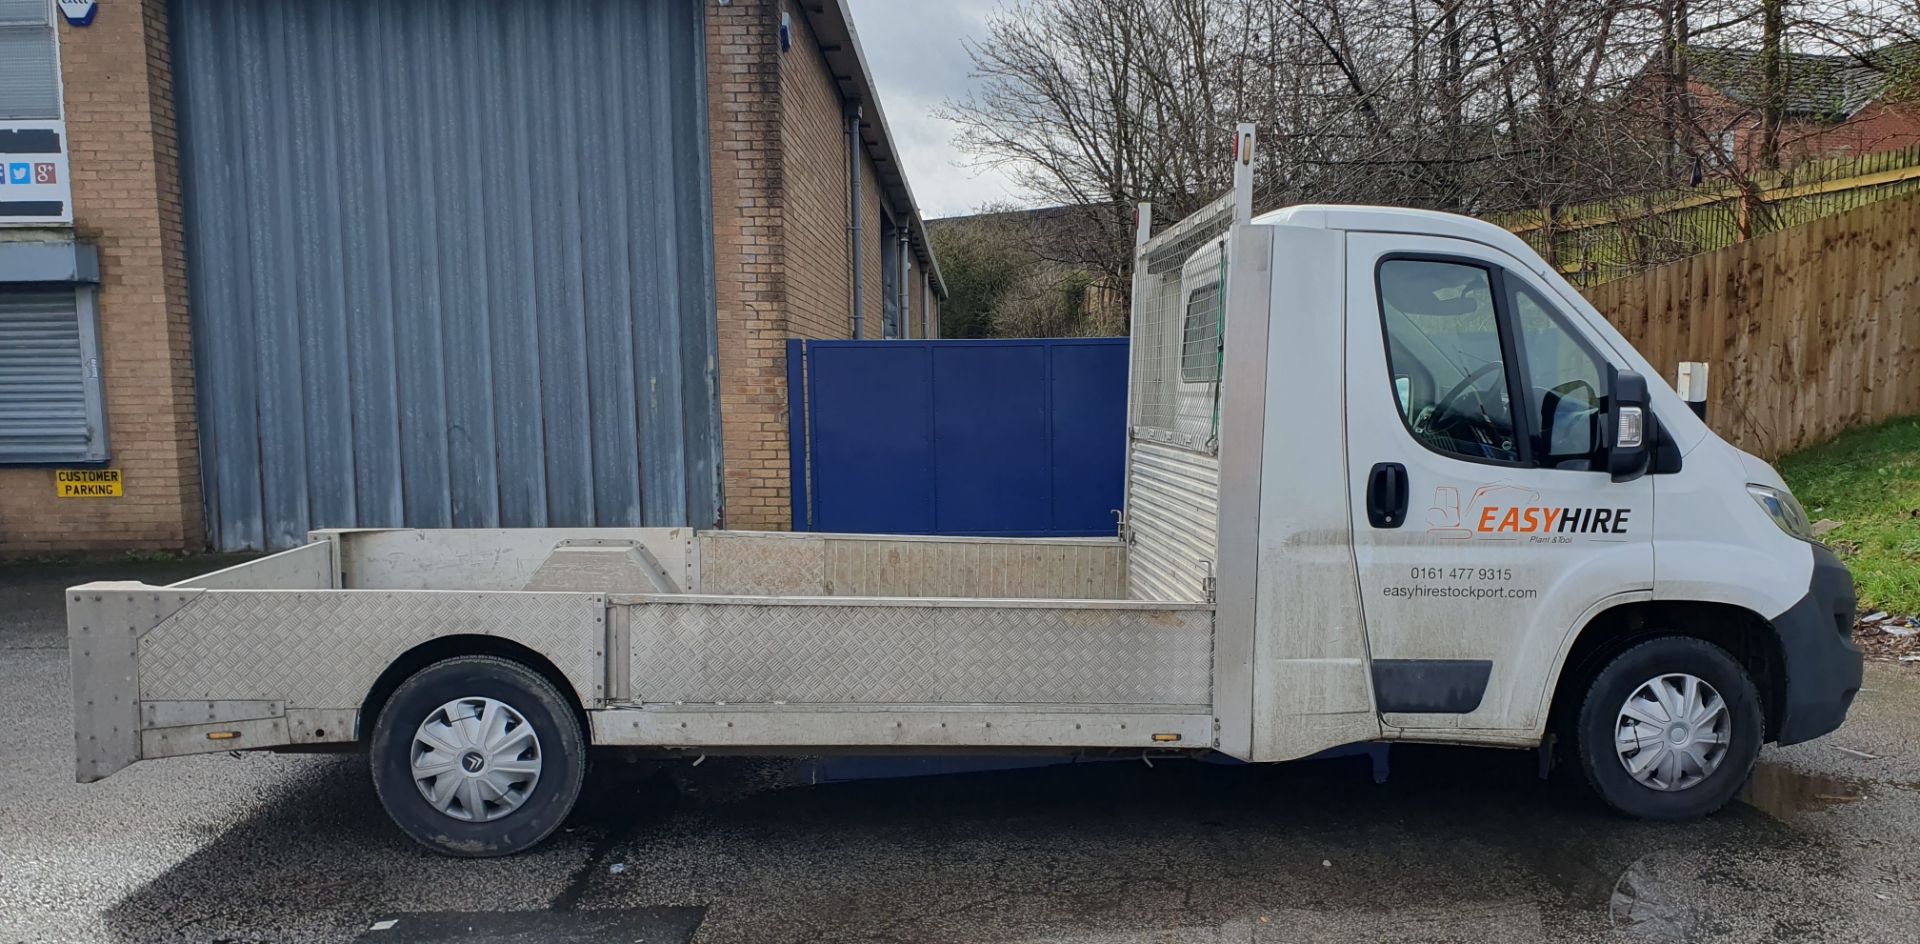 Citroen Relay X2-50 Flat Lorry w/ Loading Ramp Sides | DIG 4928 | 148,060 Miles - Image 8 of 20